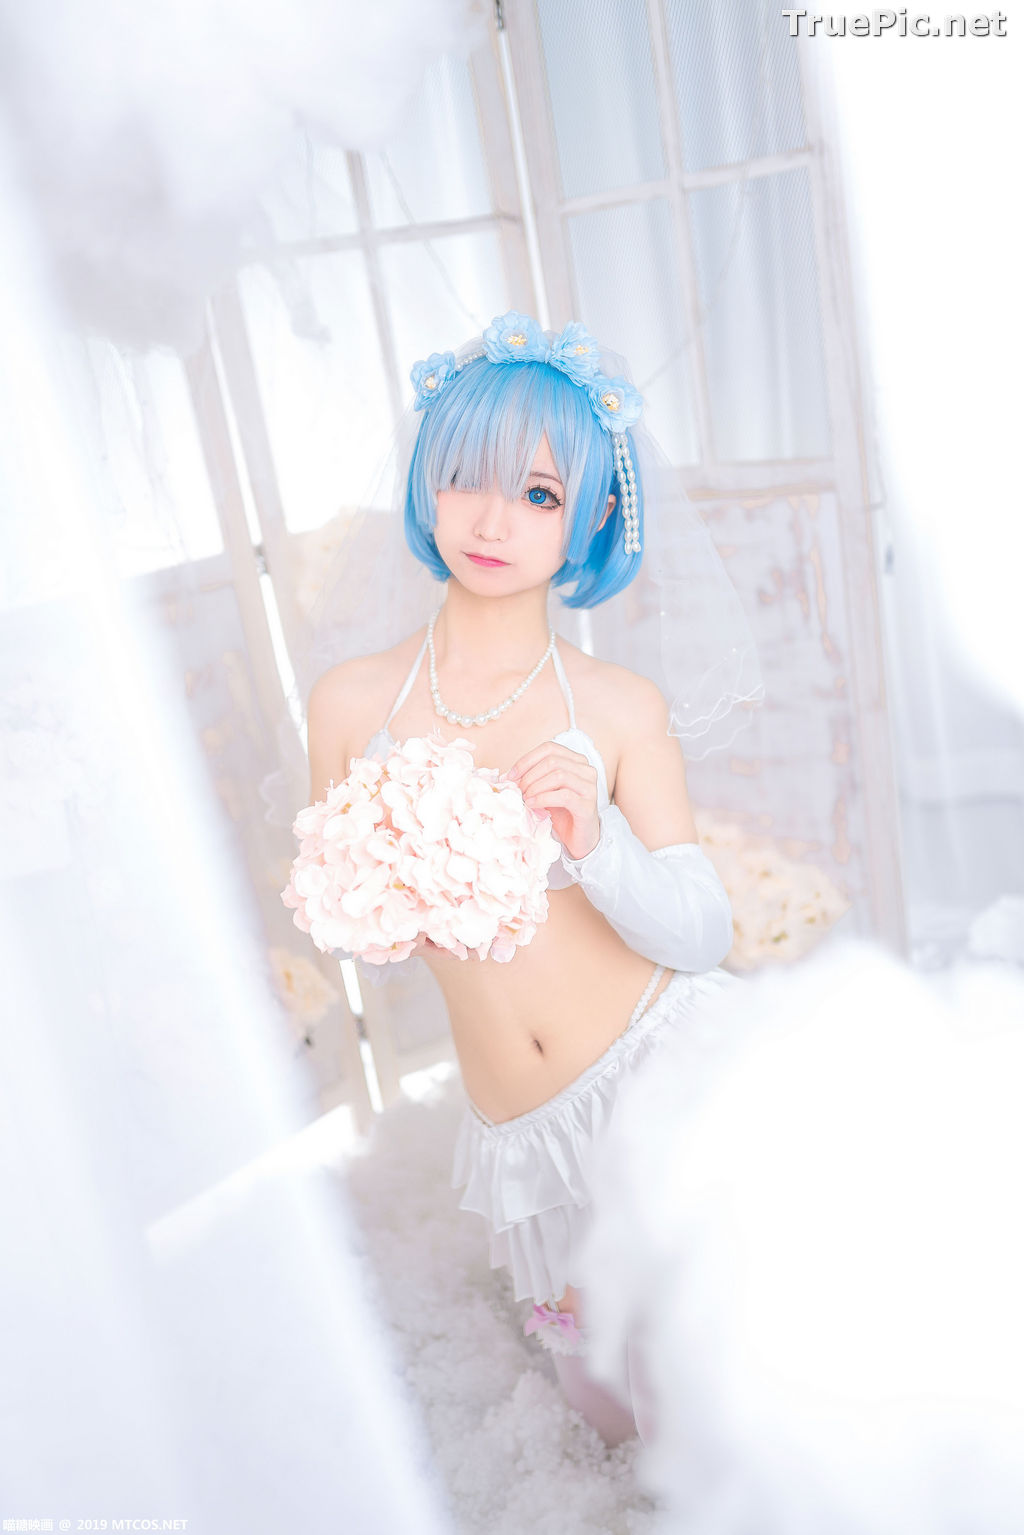 Image [MTCos] 喵糖映画 Vol.029 – Chinese Cute Model – Bride Rem Cosplay - TruePic.net - Picture-14